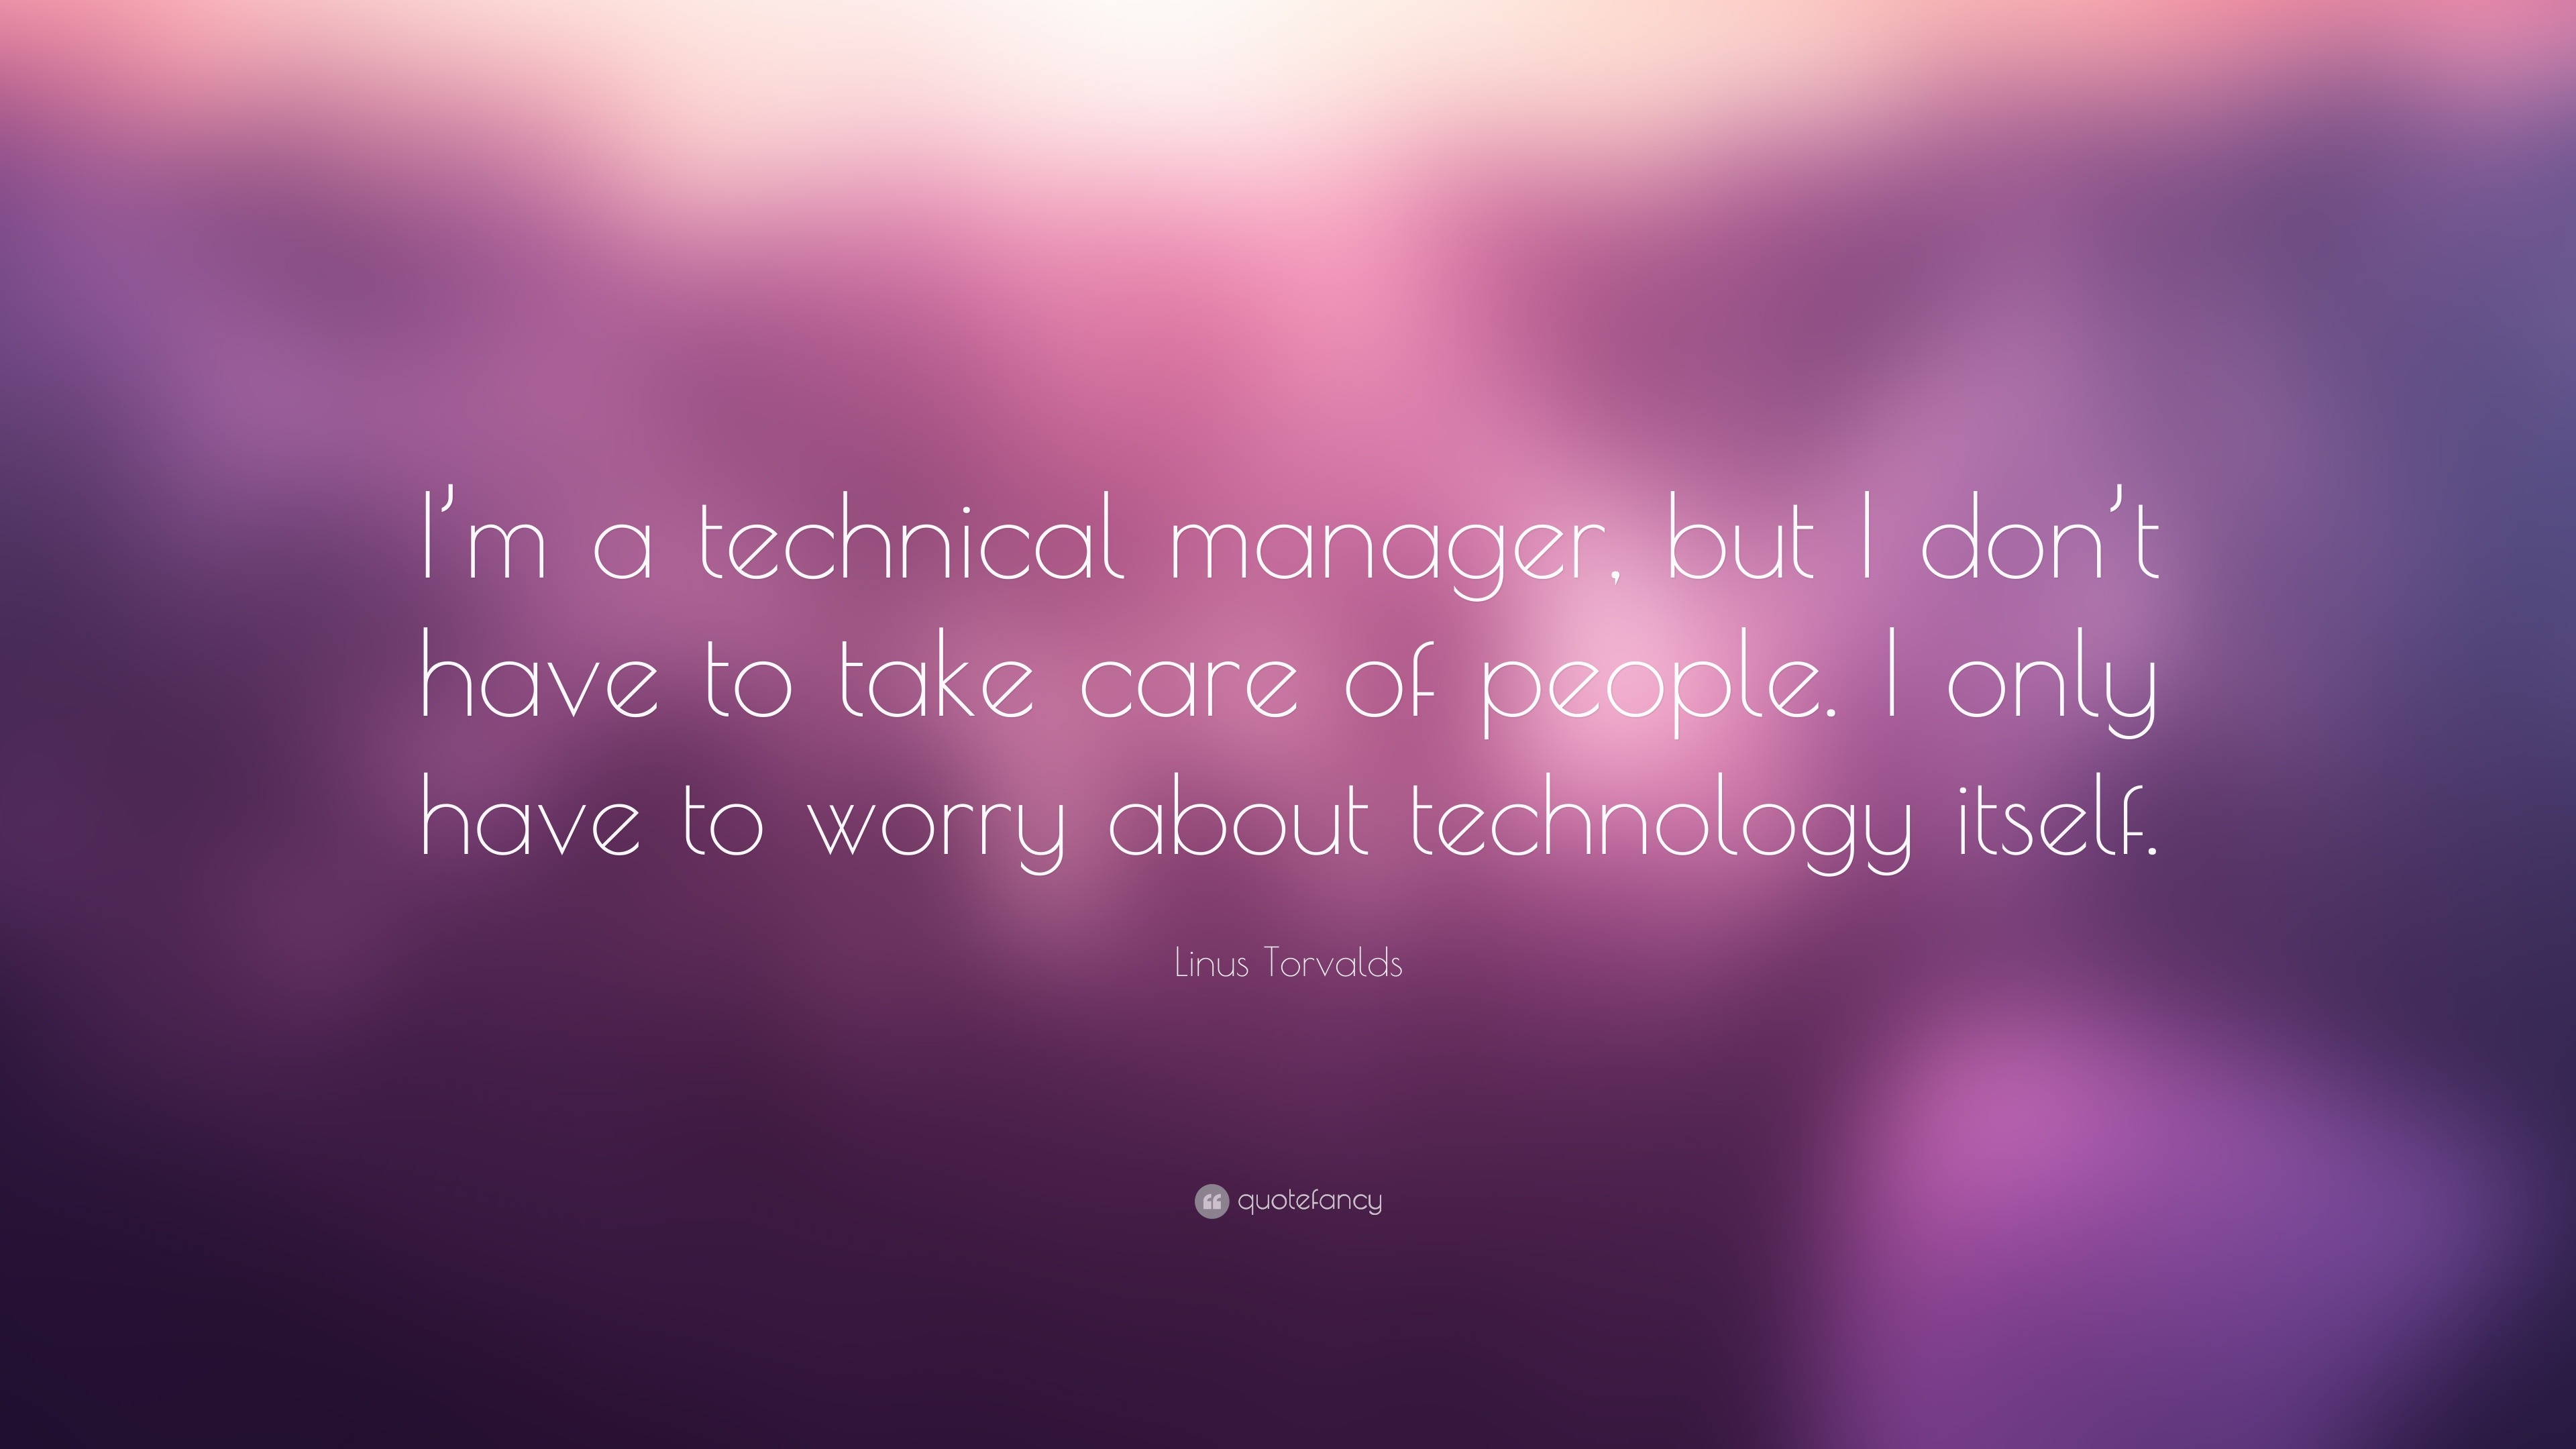 Linus Torvalds Quote: “I’m a technical manager, but I don’t have to take care of ...